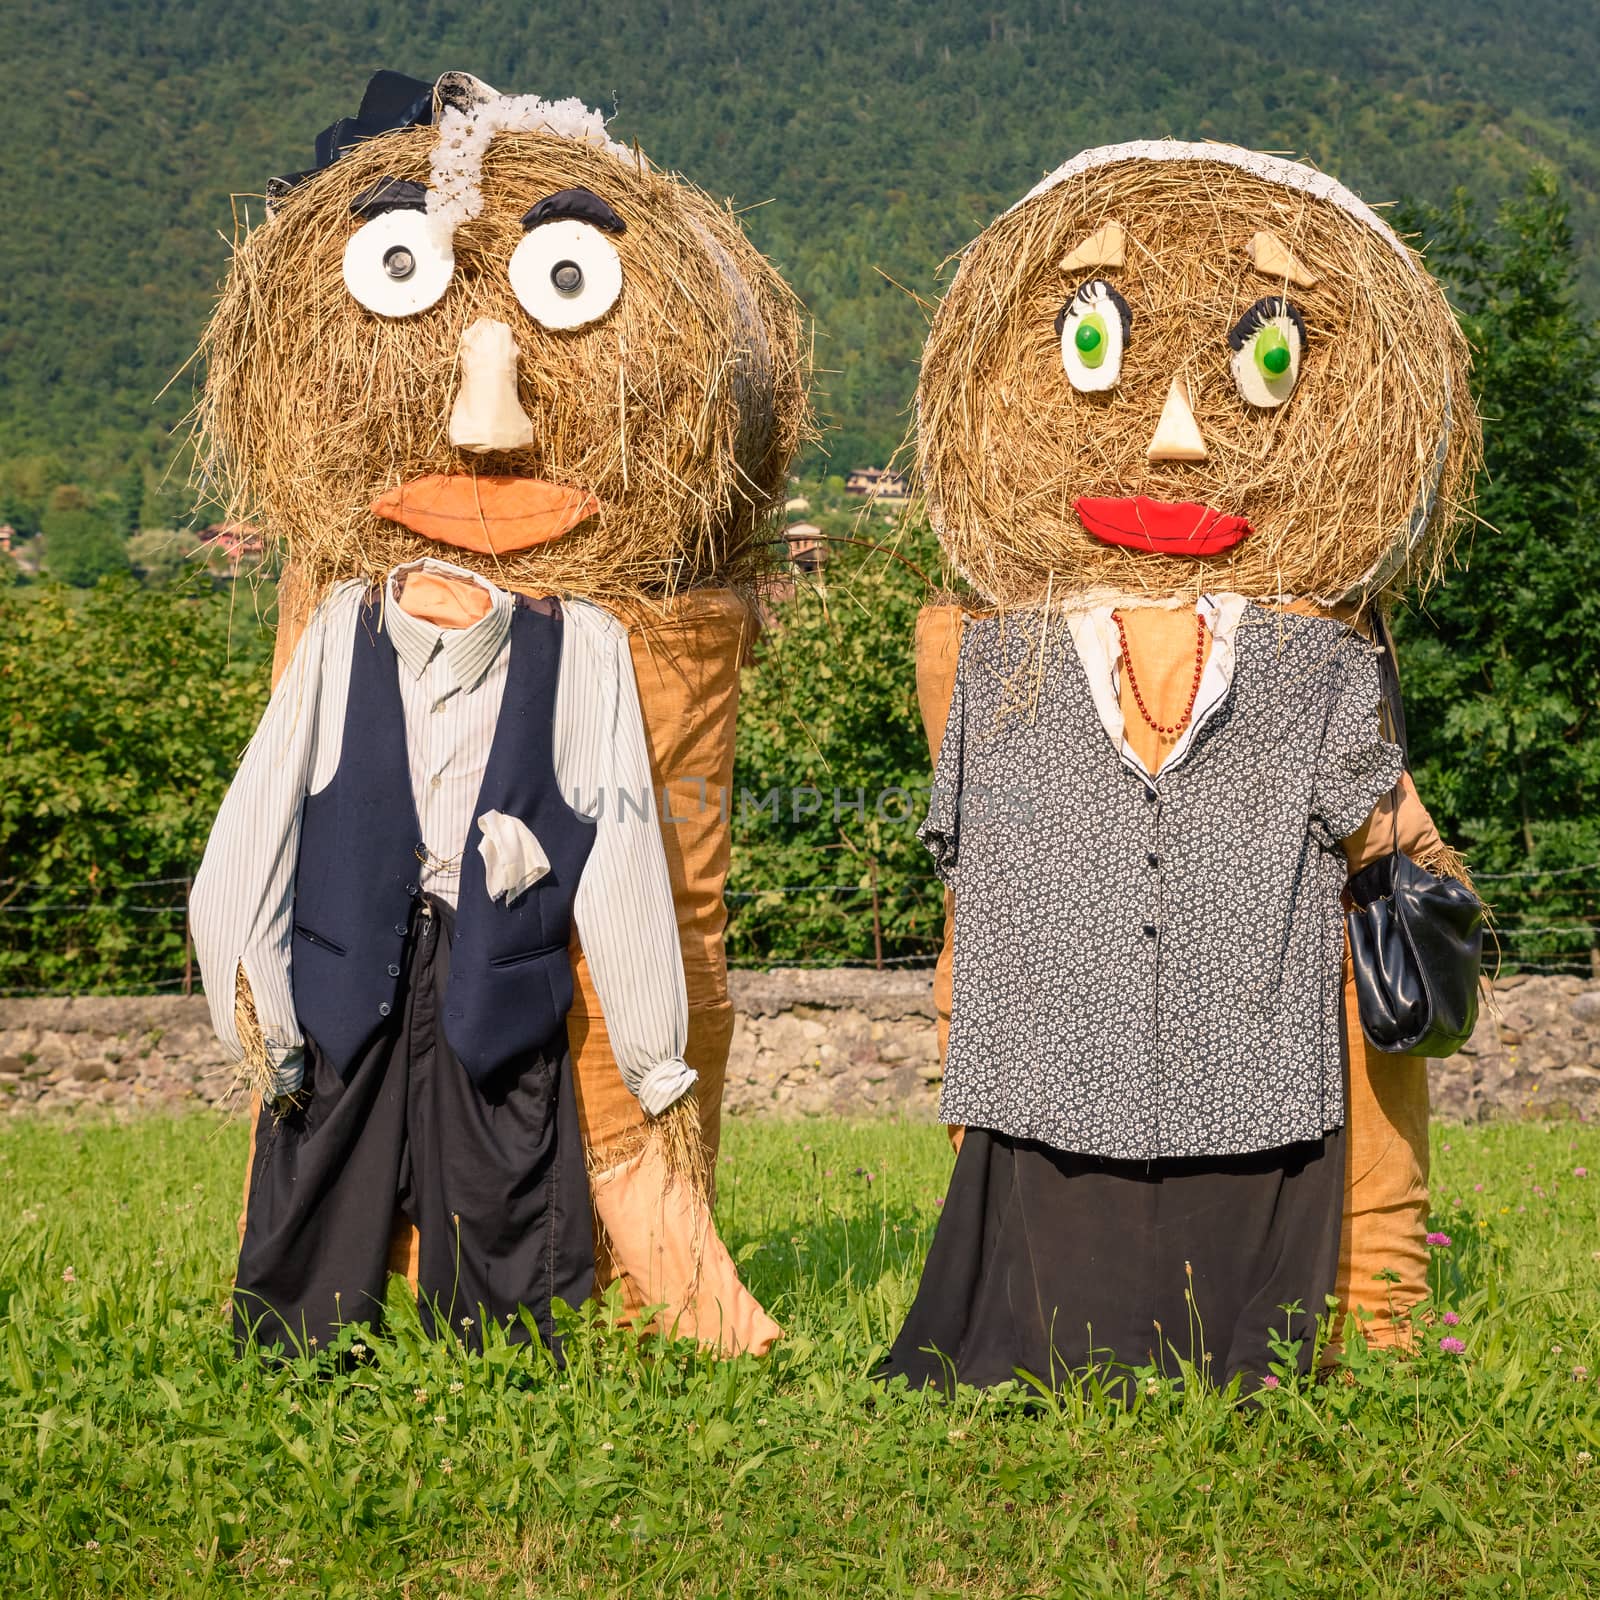 Lovely farmers Couple Puppets(straw dolls) made out of Hay Bale with typical peasant clothes in europe autumn,square photo.